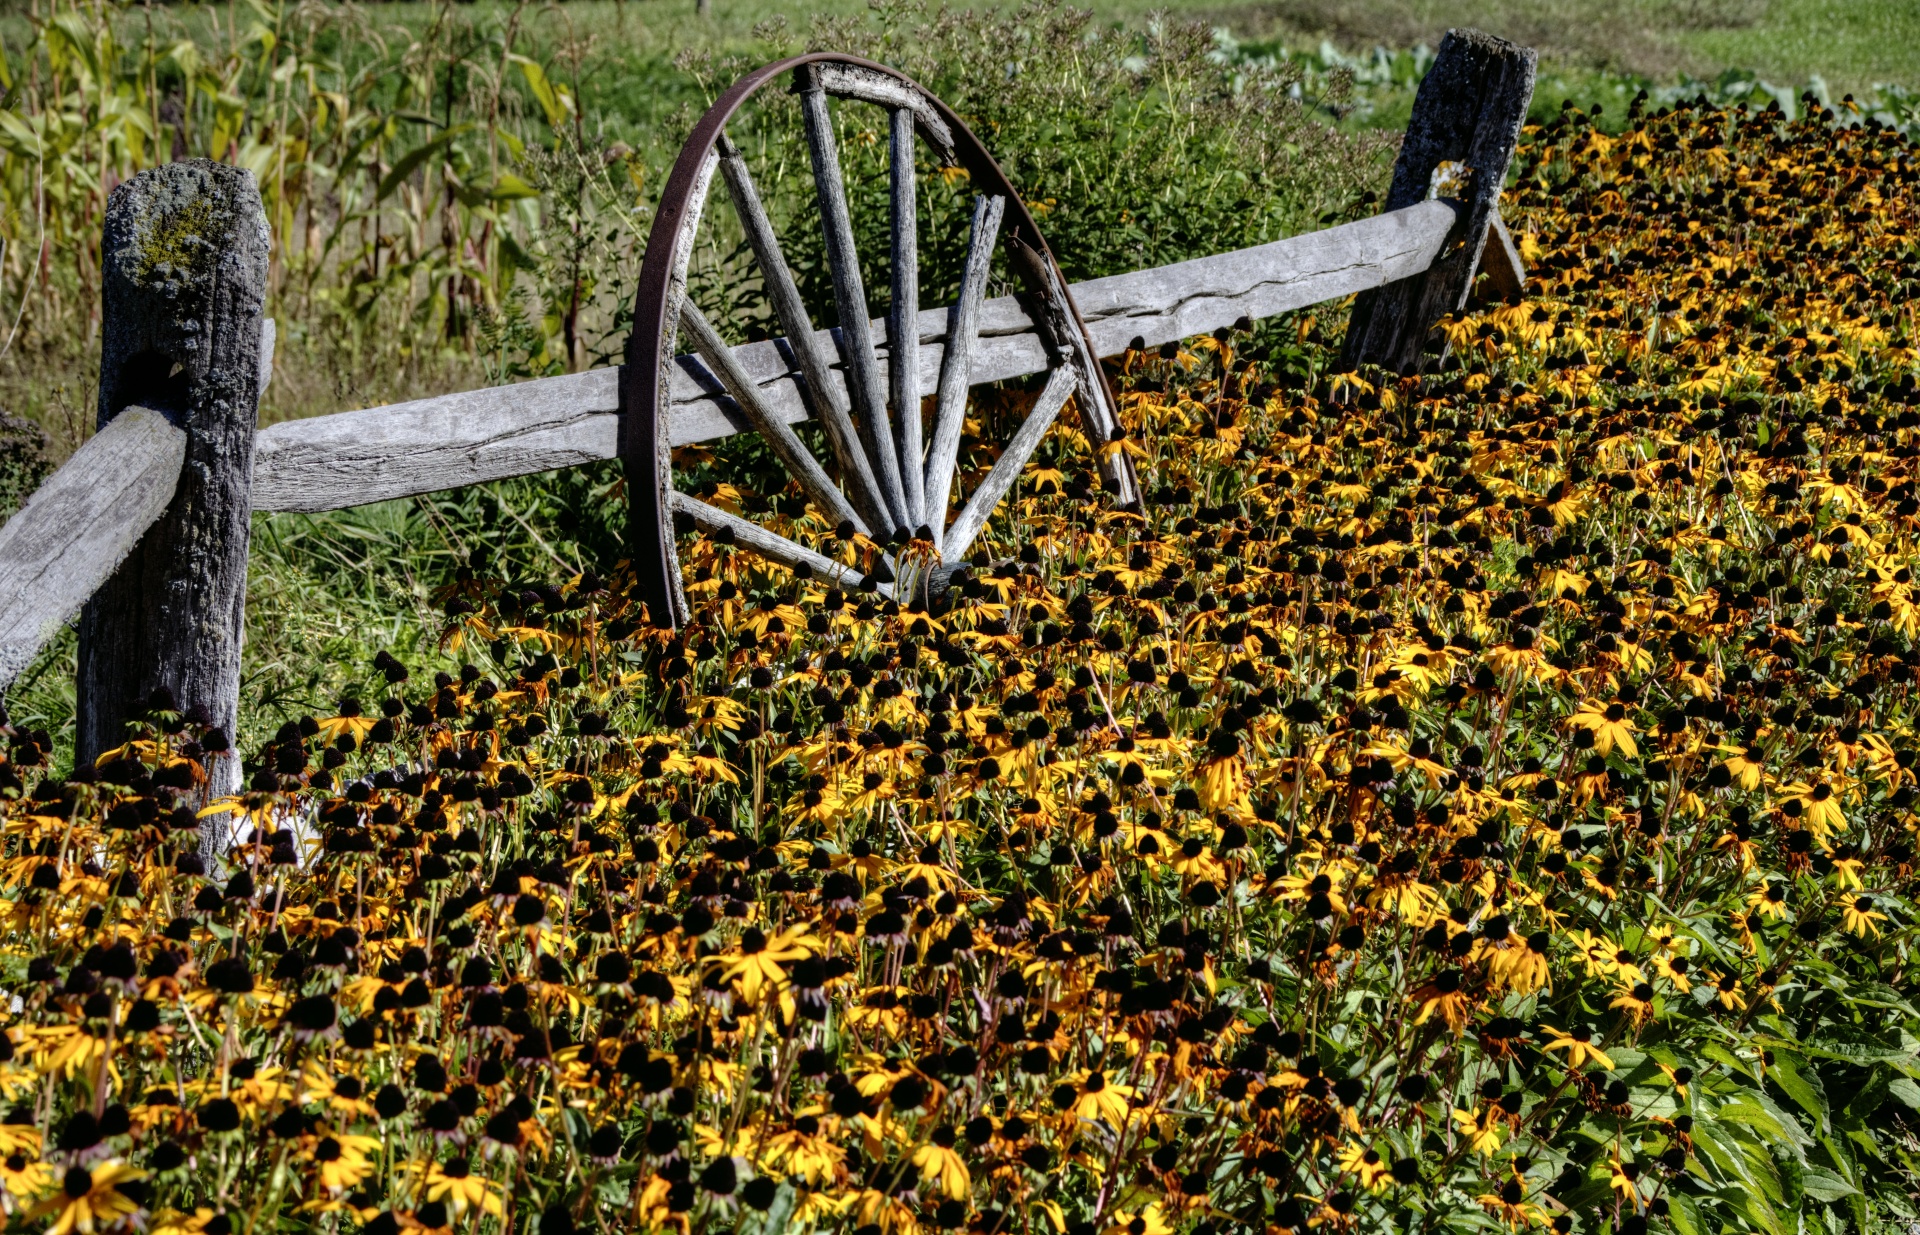 old wagon wheel propped up against a wood fence surrounded by yellow cornflowers that look like drooping sunflowers